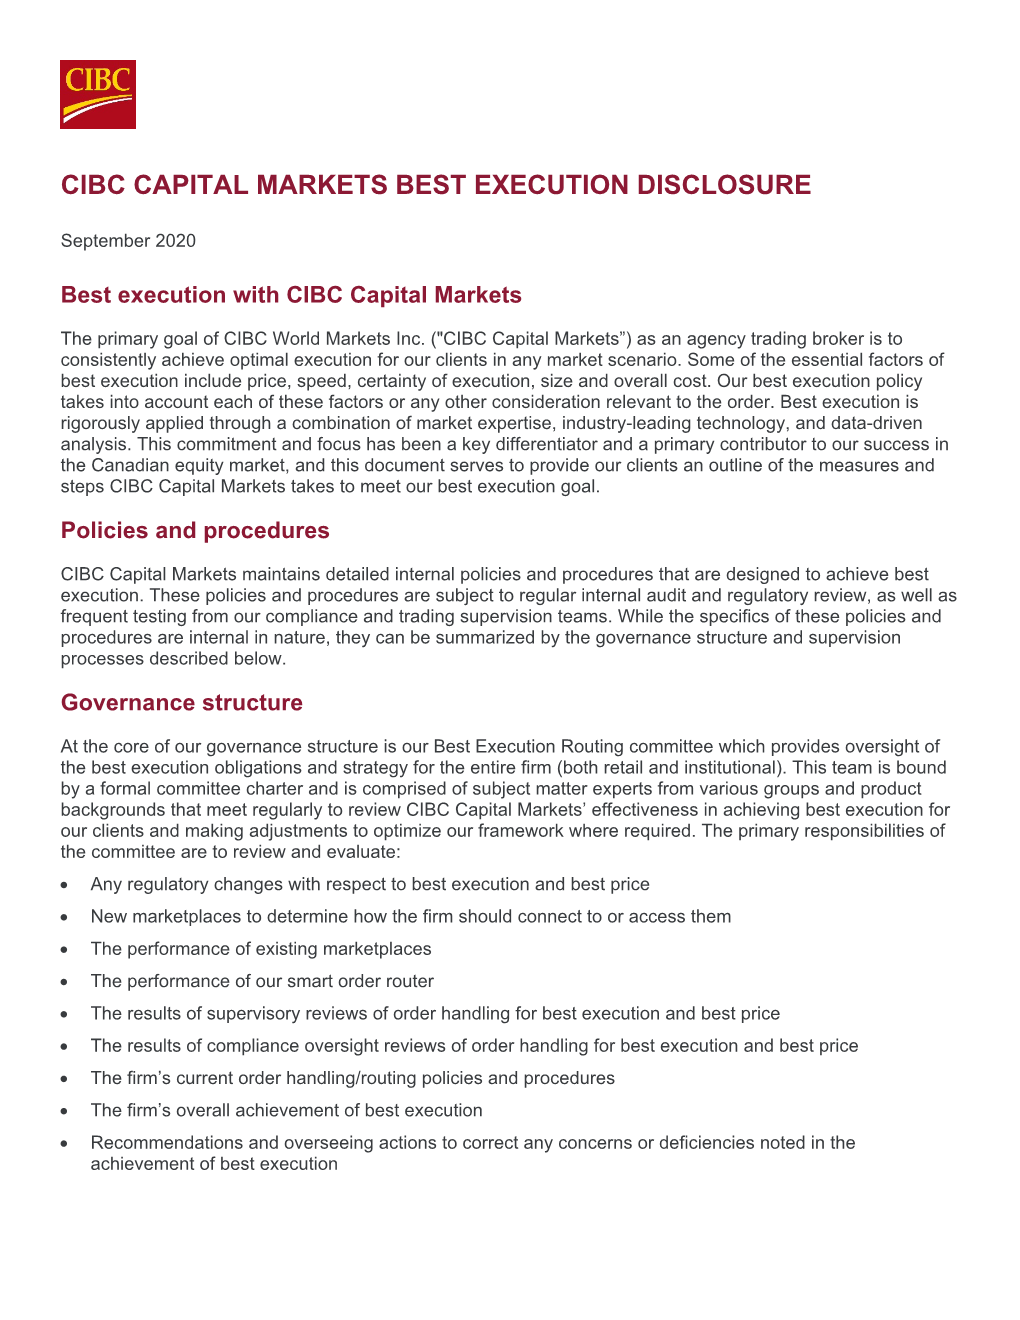 CIBC Best Execution Policy